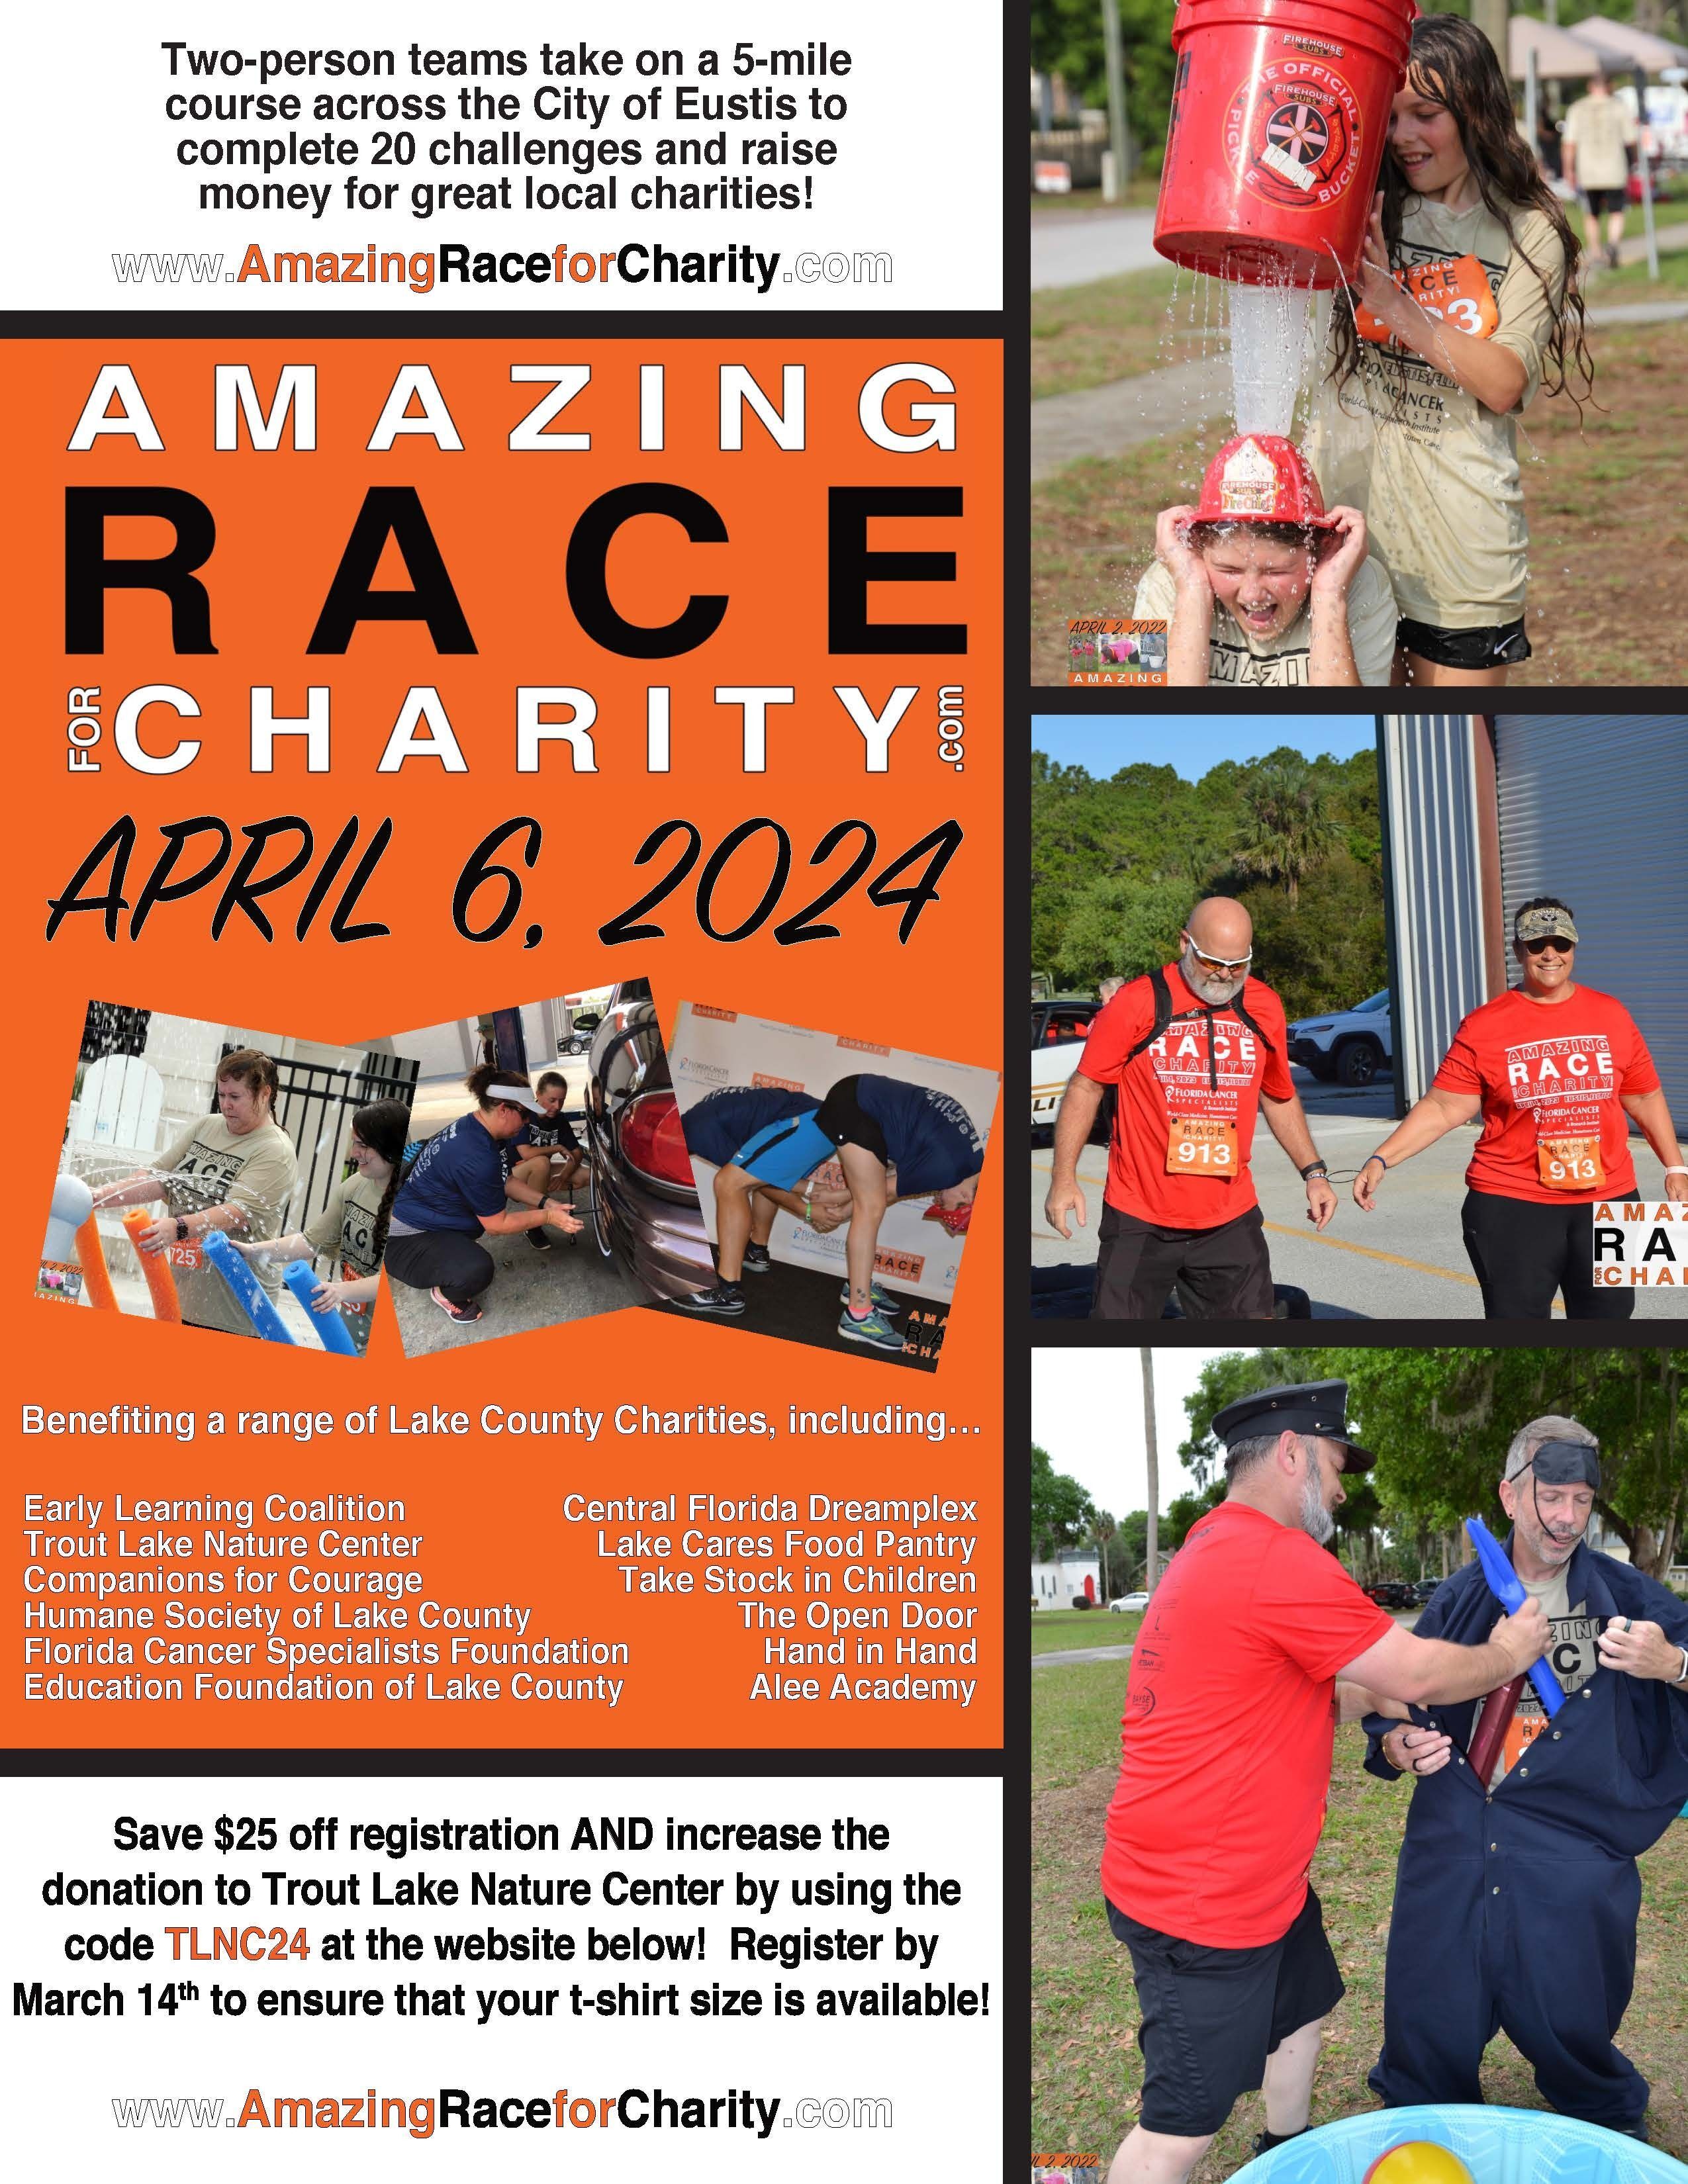 Flyer showing activities from previous races and text about how to register